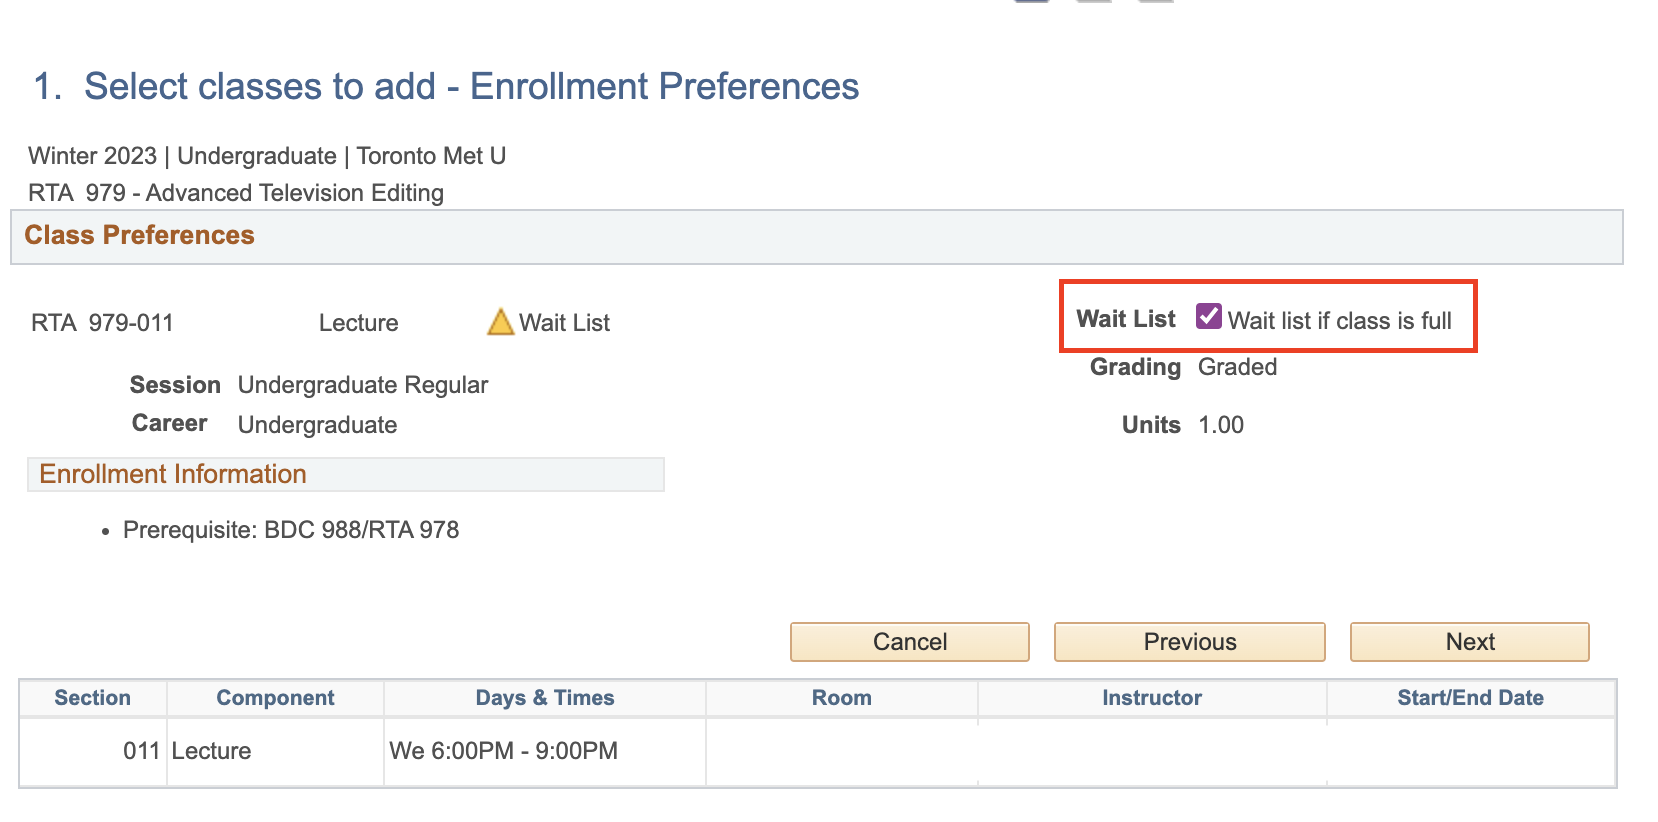 Wait list button checked to enable wait list if class is full in the enrolment preferences page.